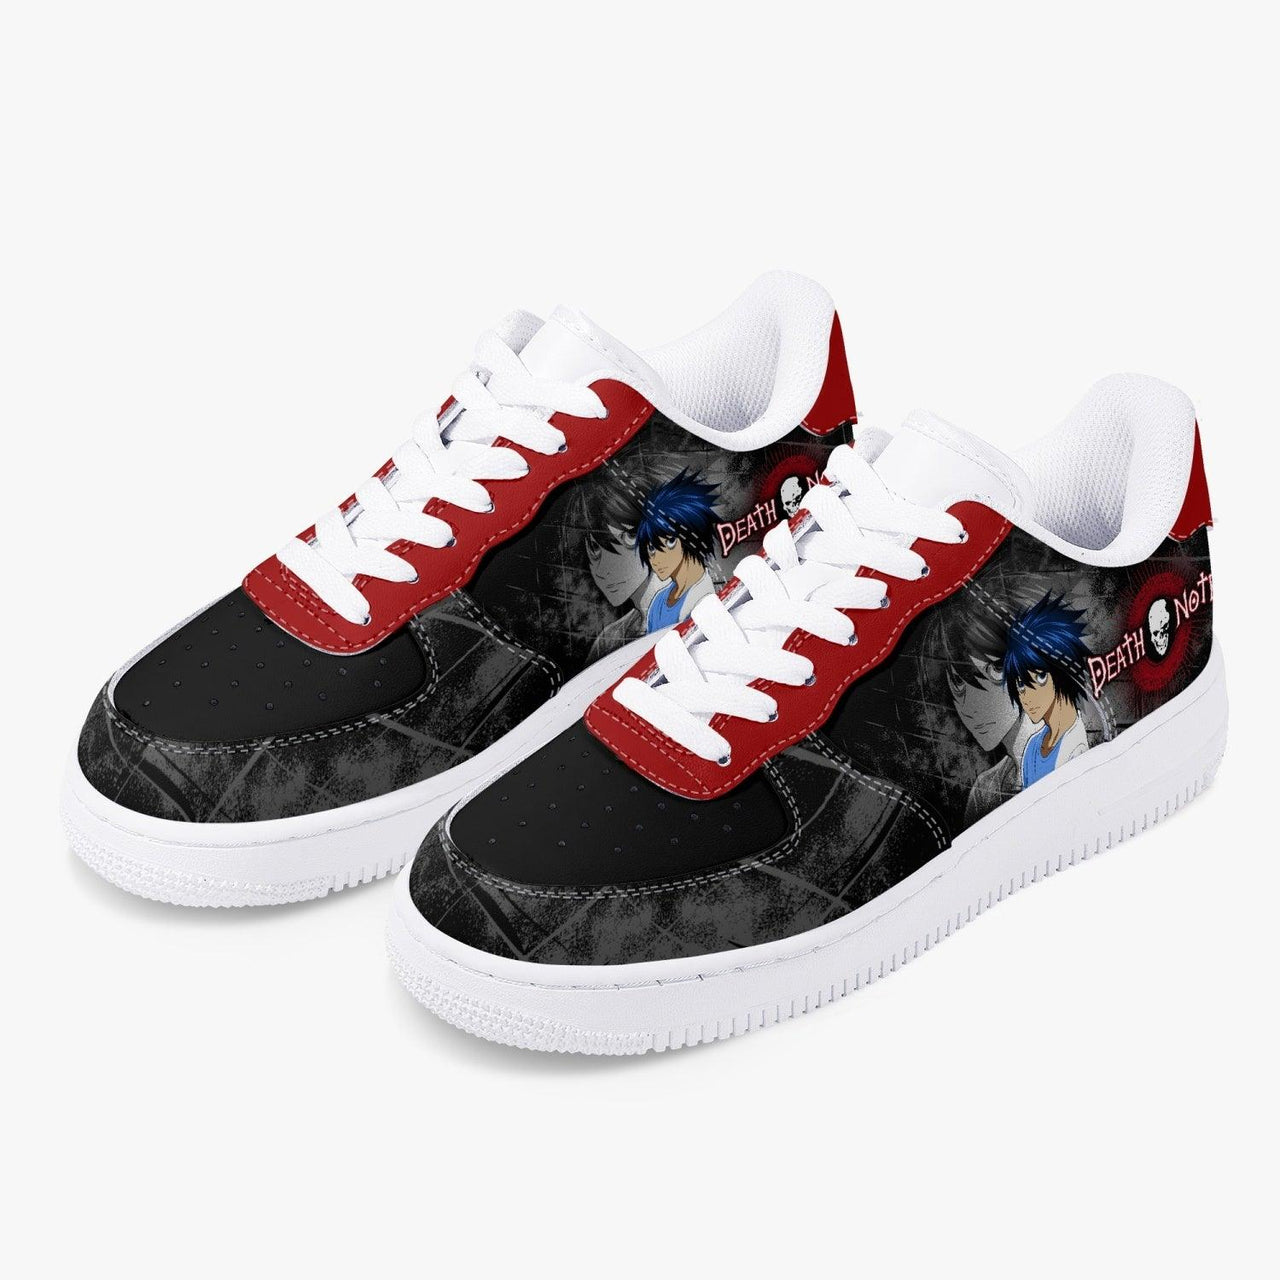 Death Note L Black Red AF1 Anime Shoes _ Death Note _ Ayuko